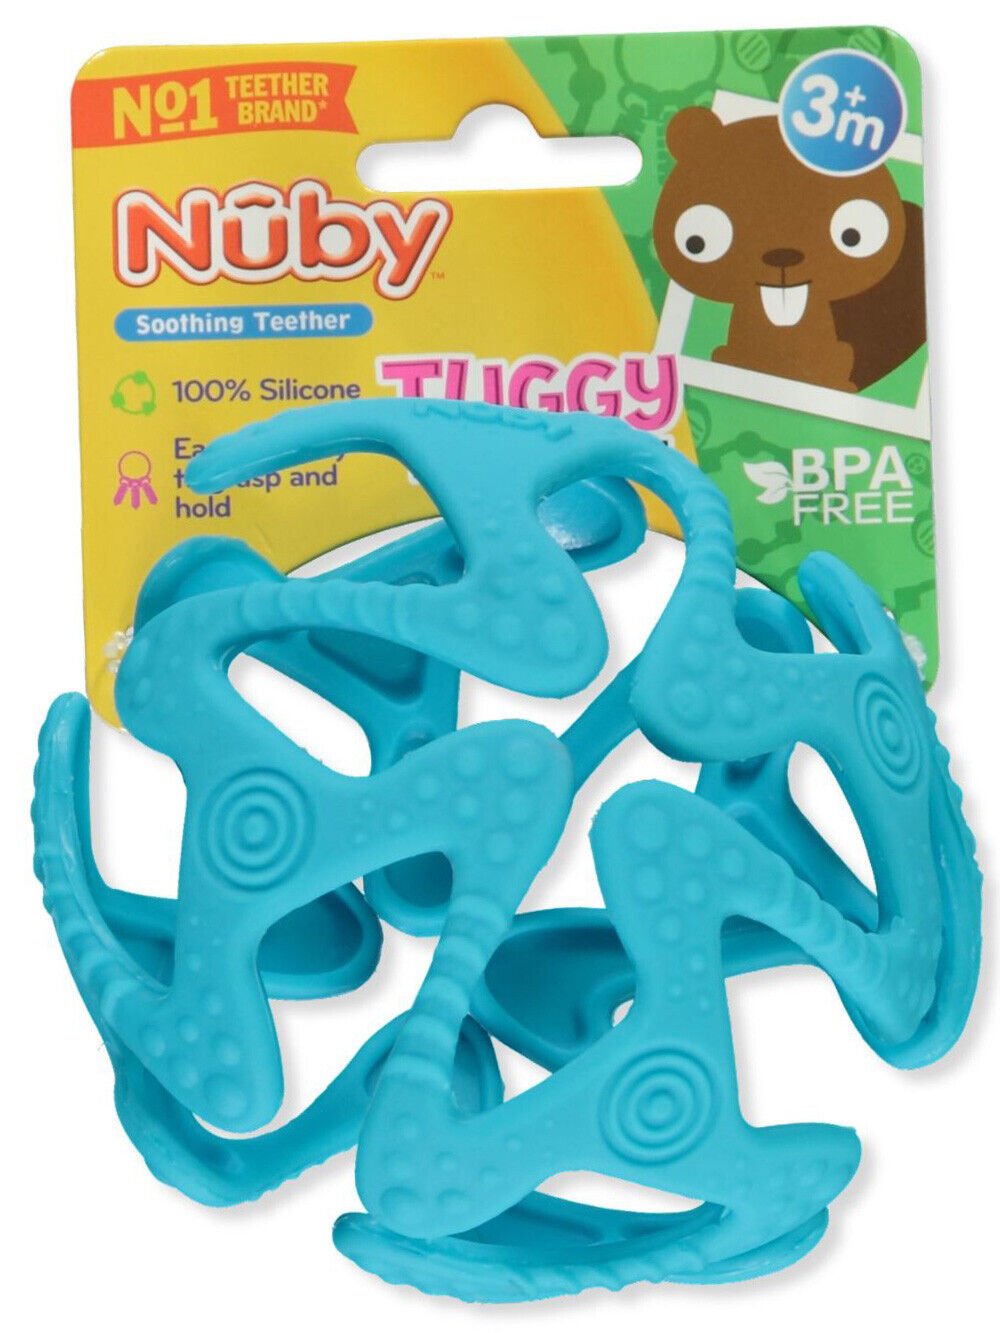 Nuby Tuggy Teething Teether Don't miss the campaign Ball Soothing Special sale item